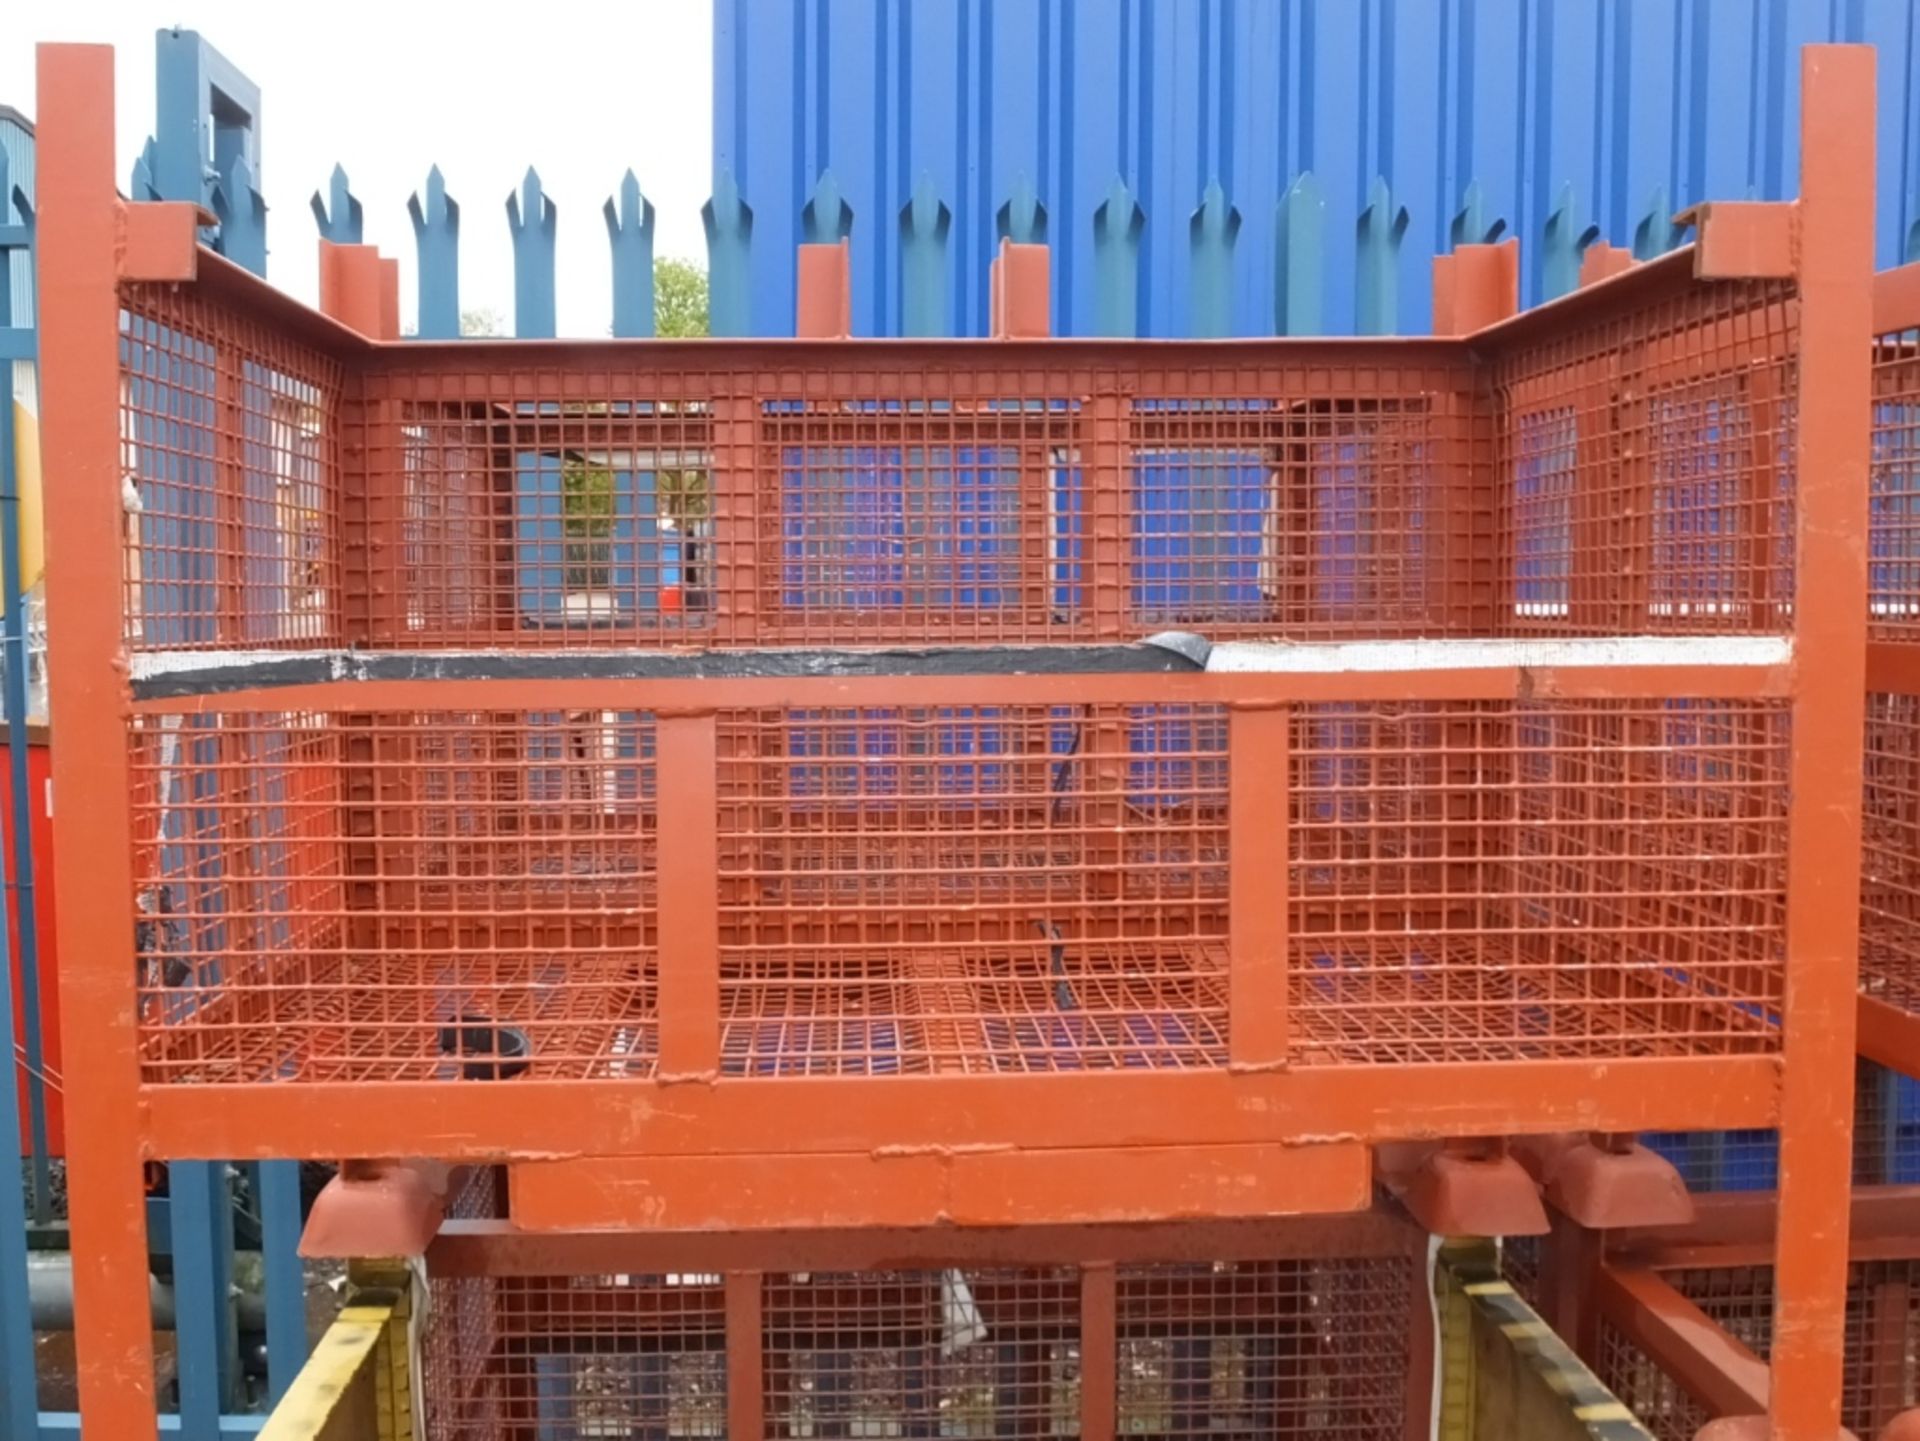 4x Welded solid caged stillages - Please note there will be a loading fee of £5 on this it - Image 3 of 3